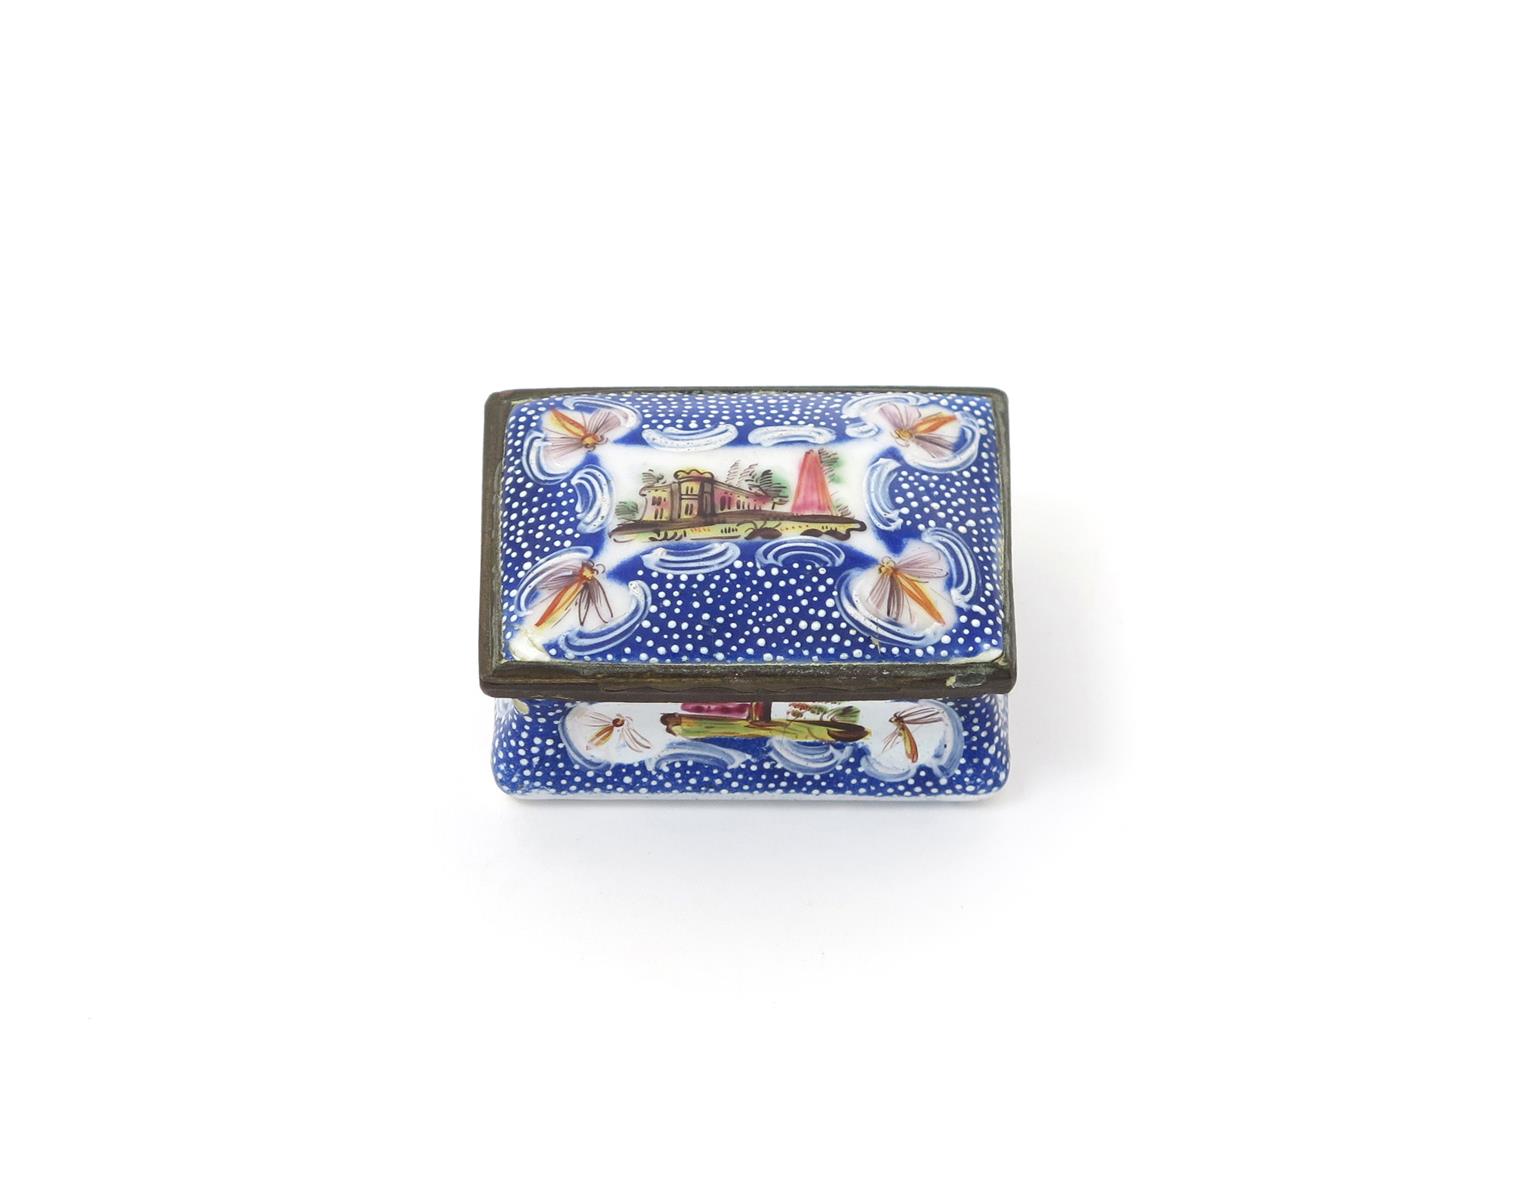 A small enamel rectangular snuff box, late 18th/early 19th century, painted with a small panel of